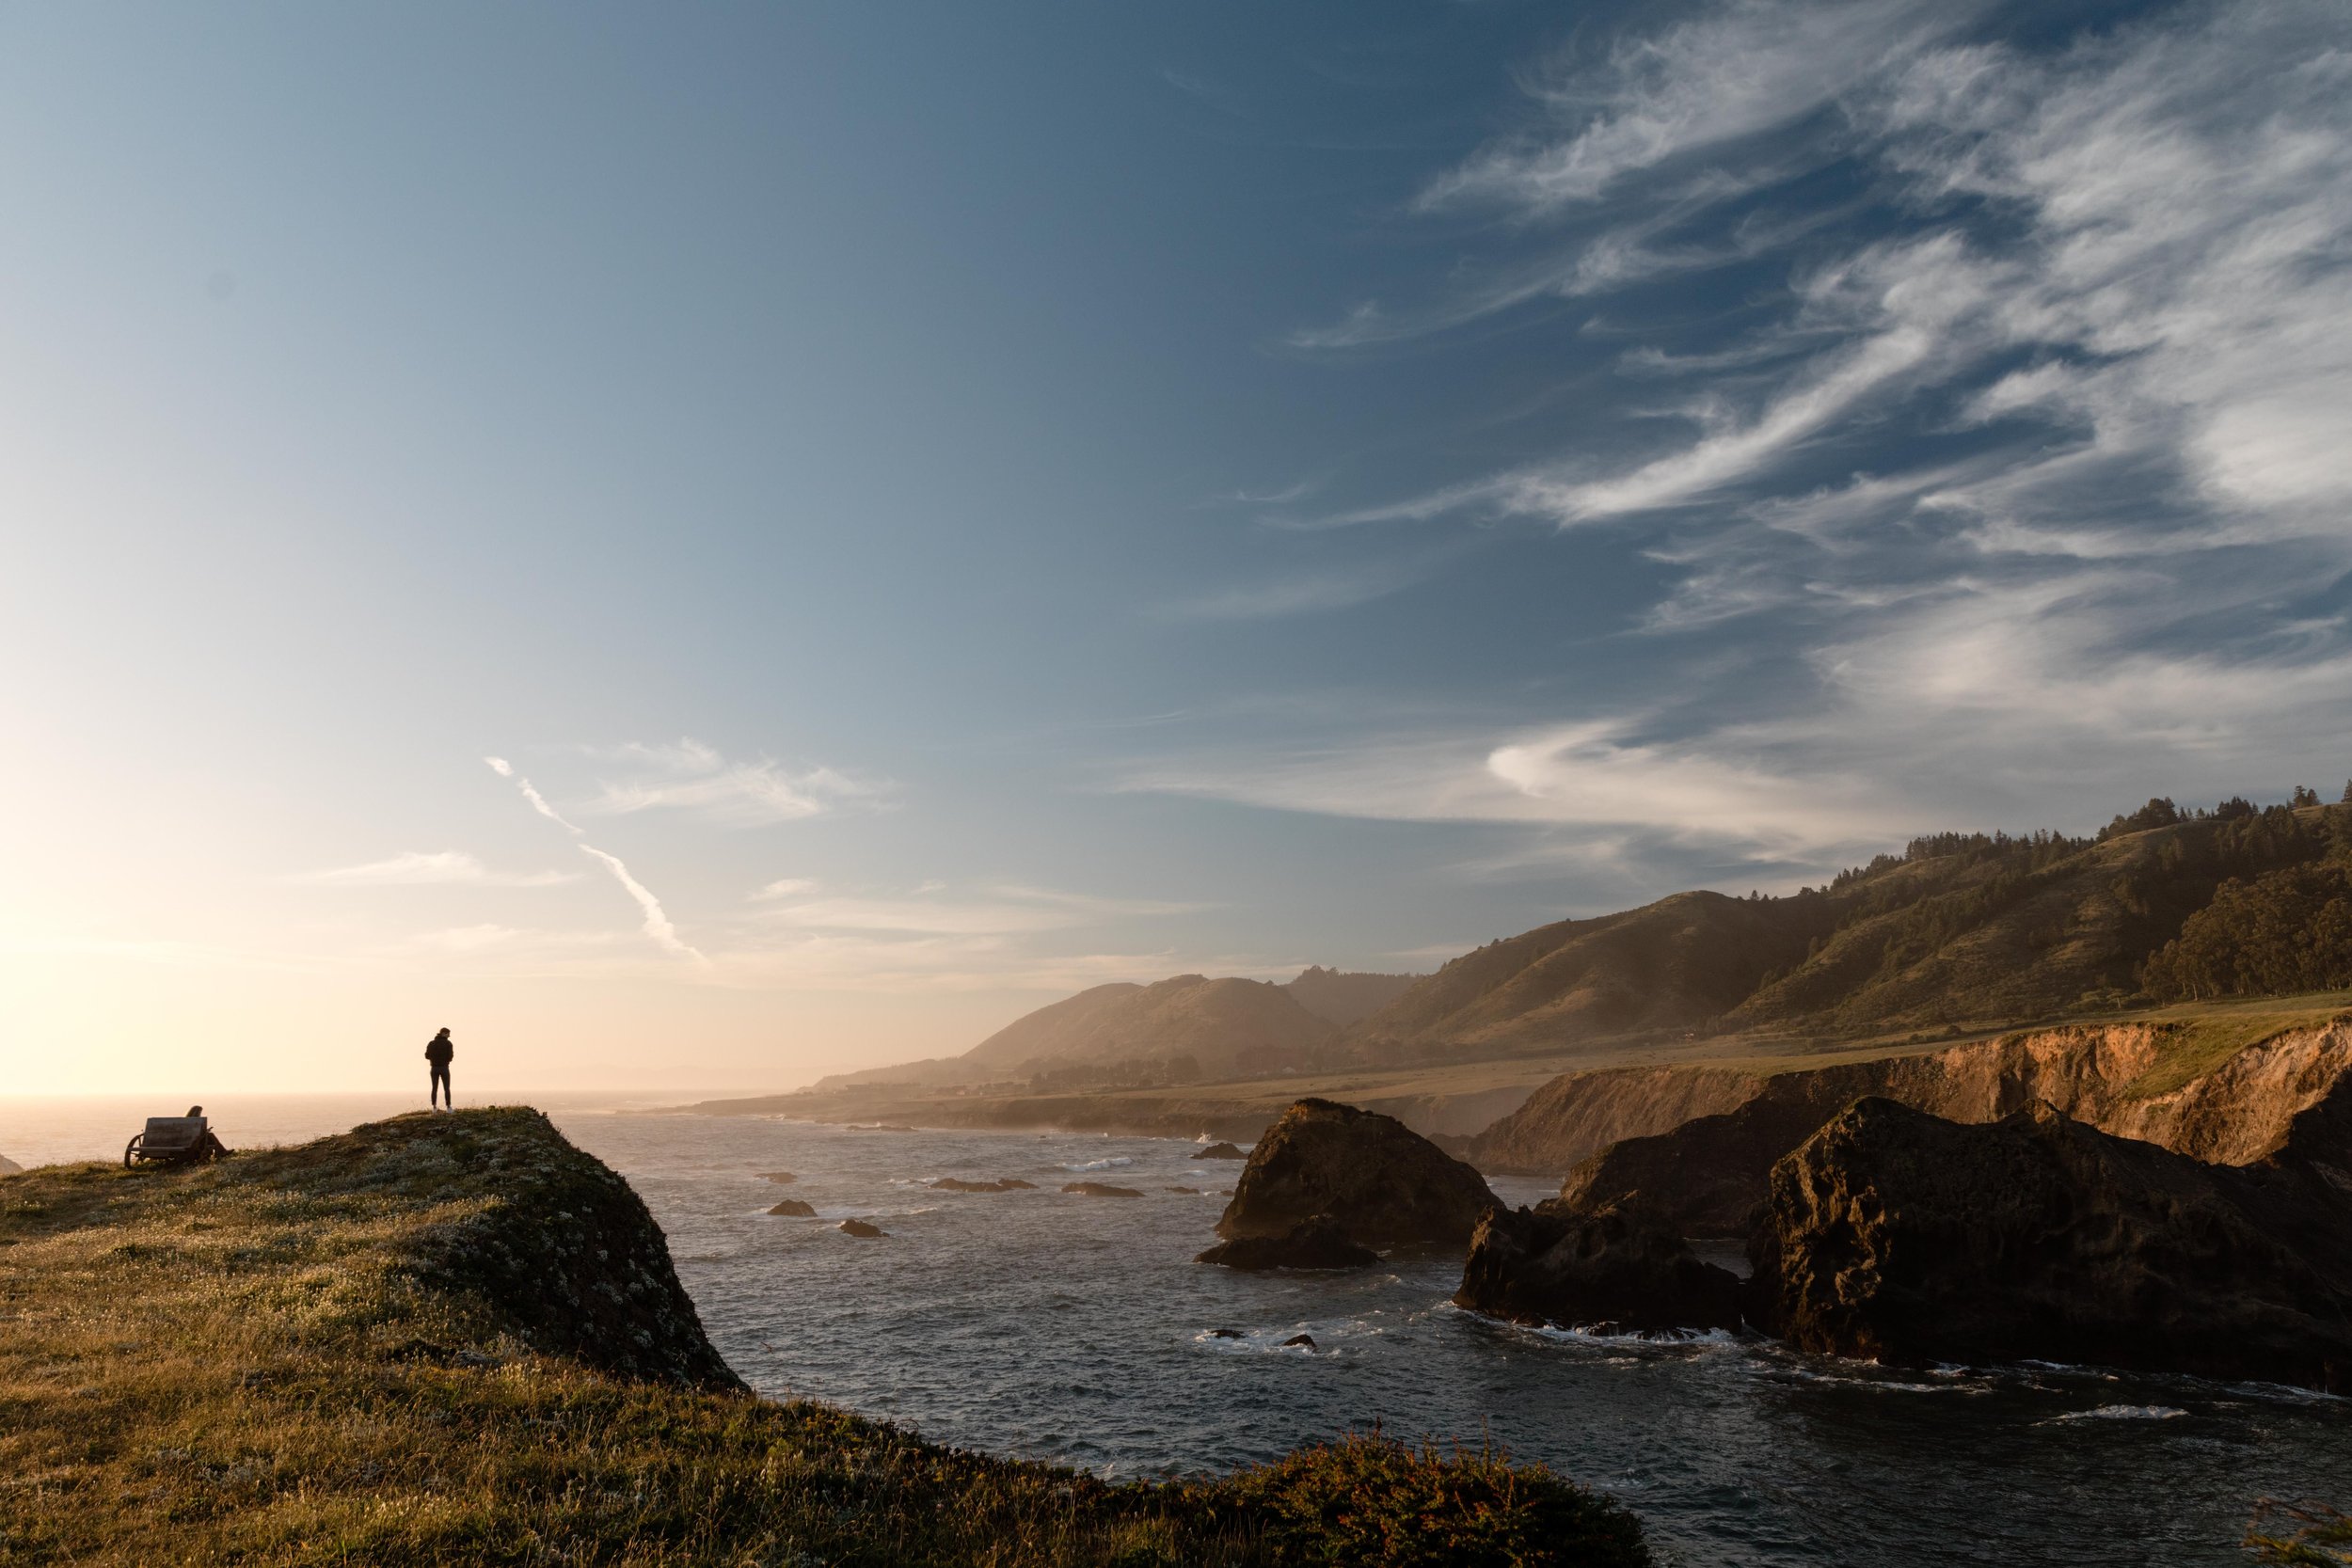 Panoramic view of rocky Pacific Coastline with a man's silhouette standing on the edge